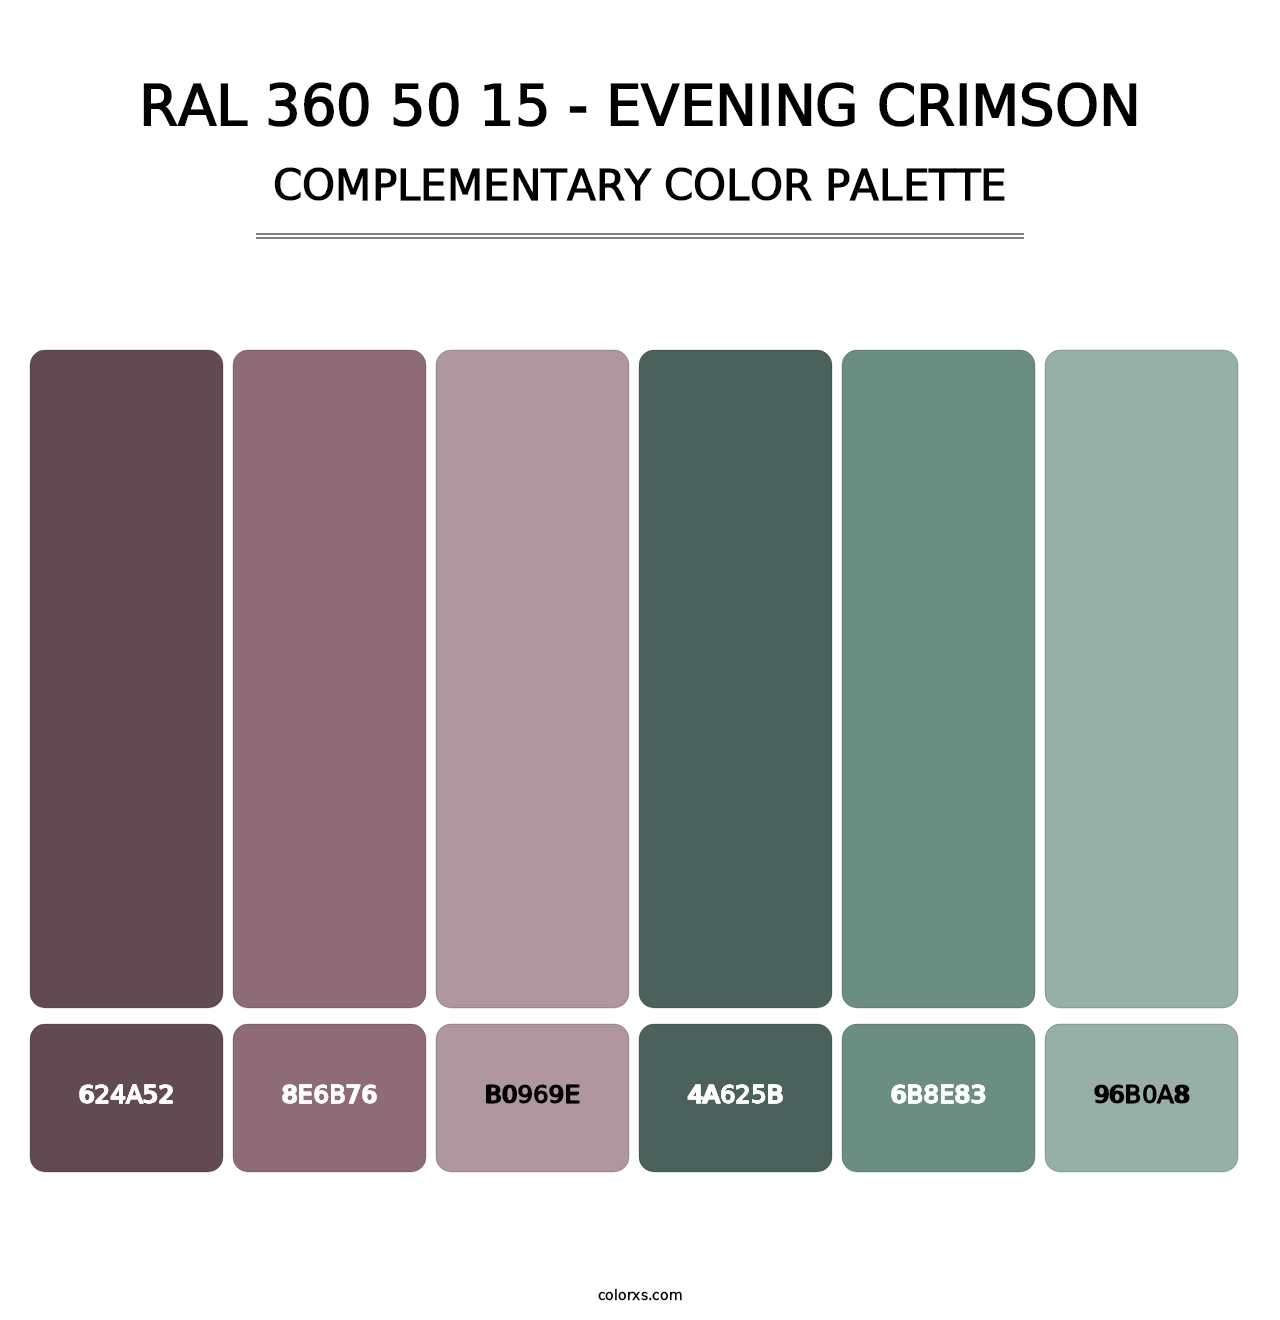 RAL 360 50 15 - Evening Crimson - Complementary Color Palette